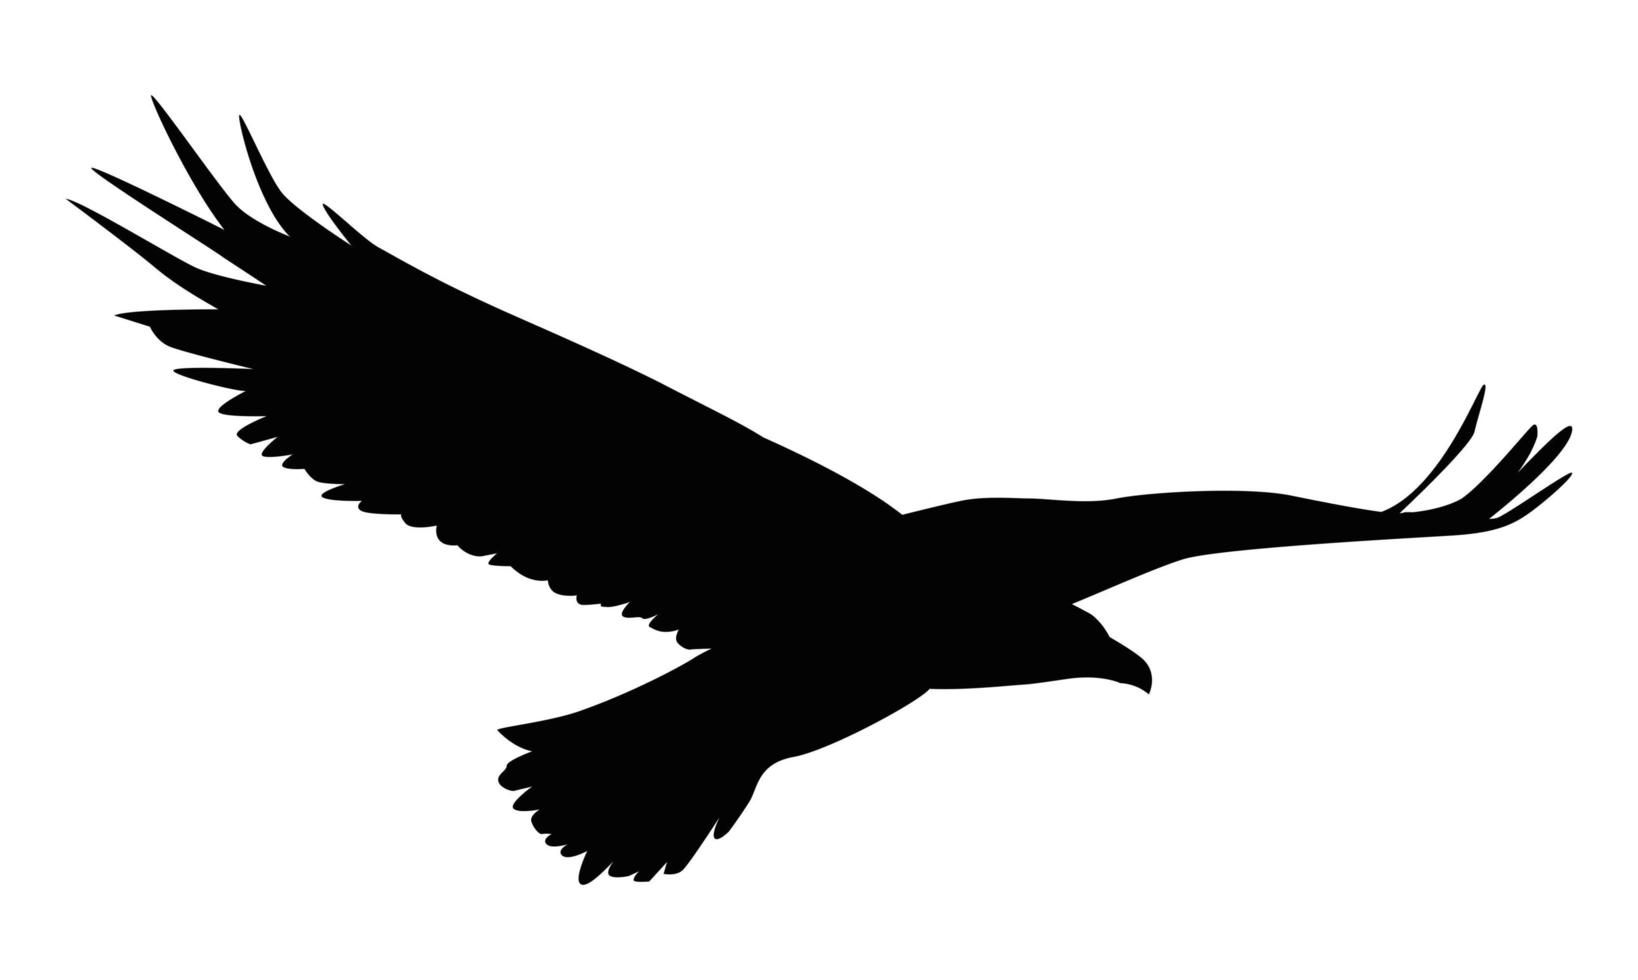 eagle flying silhouette vector